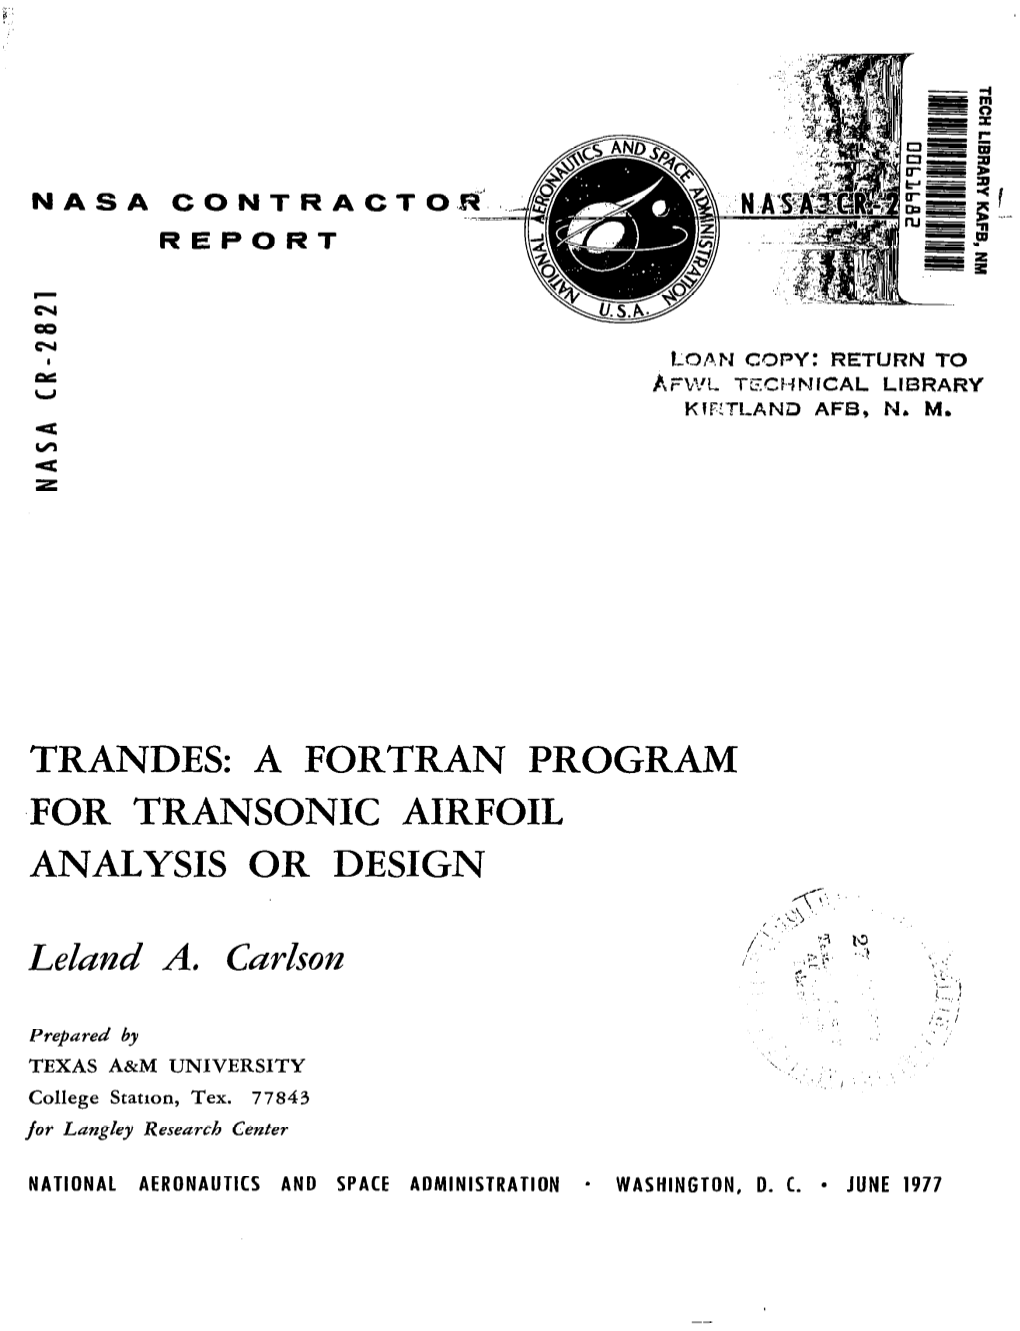 A FORTRAN PROGRAM ,FOR TRANSONIC AIRFOIL ANALYSIS OR DESIGN Q;“., , ....Jt>